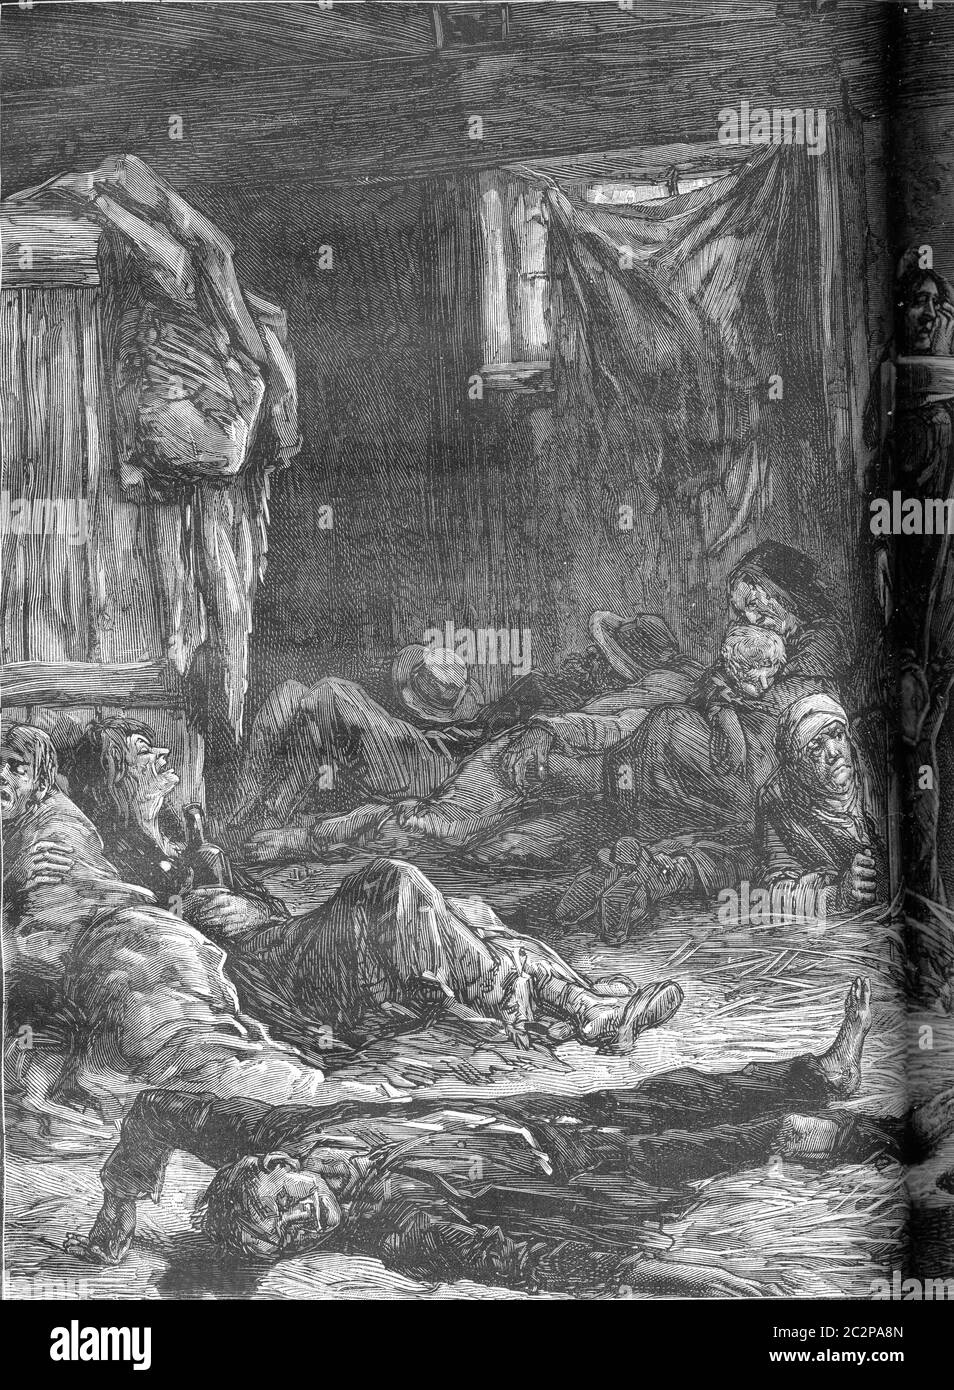 Aftermath of a brawl in a flophouse in London. From Travel Diaries, vintage engraving, 1884-85. Stock Photo